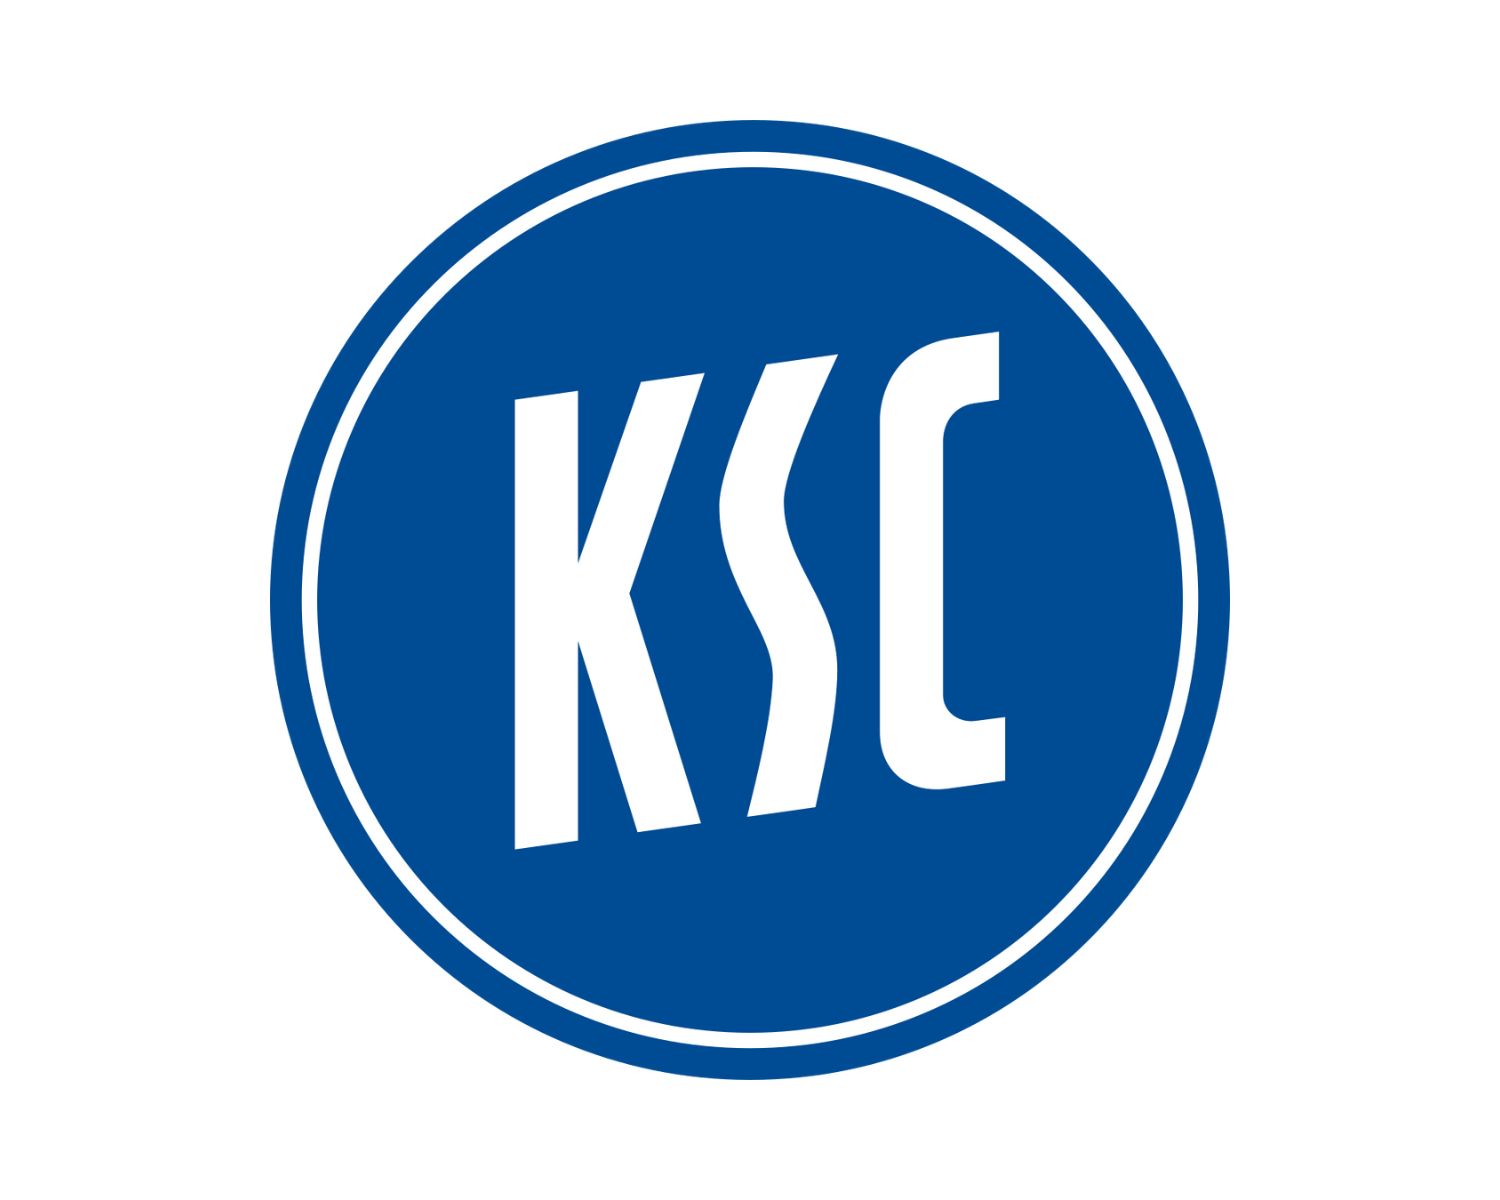 karlsruher-sc-23-football-club-facts